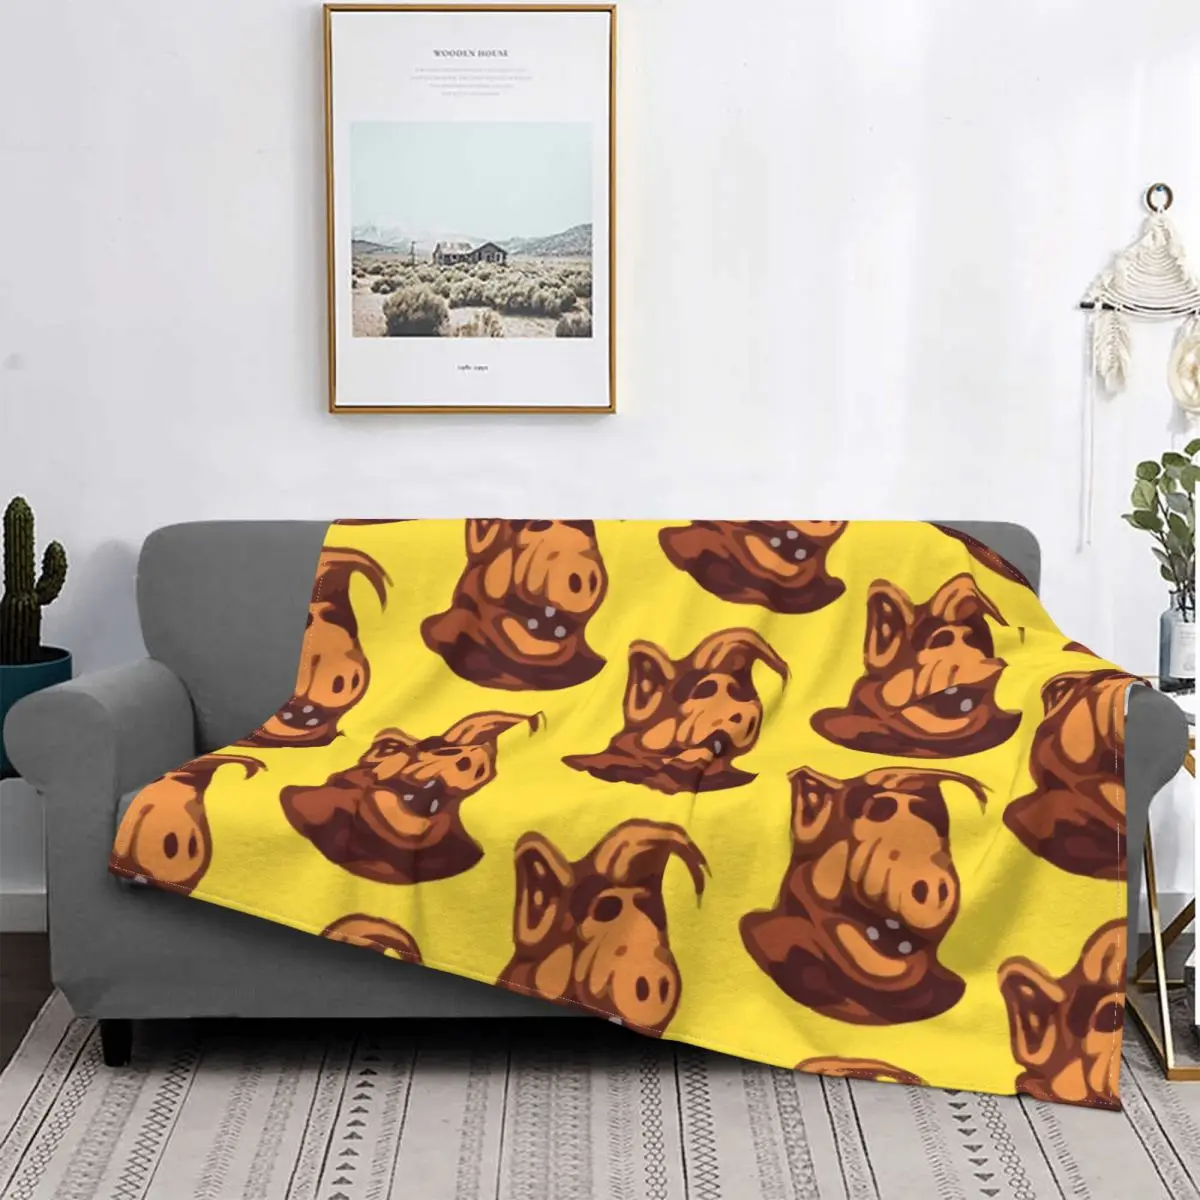 

Remember Alf Alien Life Form Blanket Soft Fleece Spring Warm Flannel Sci Fi Tv Show Throw Blankets for Sofa Home Bed Quilt